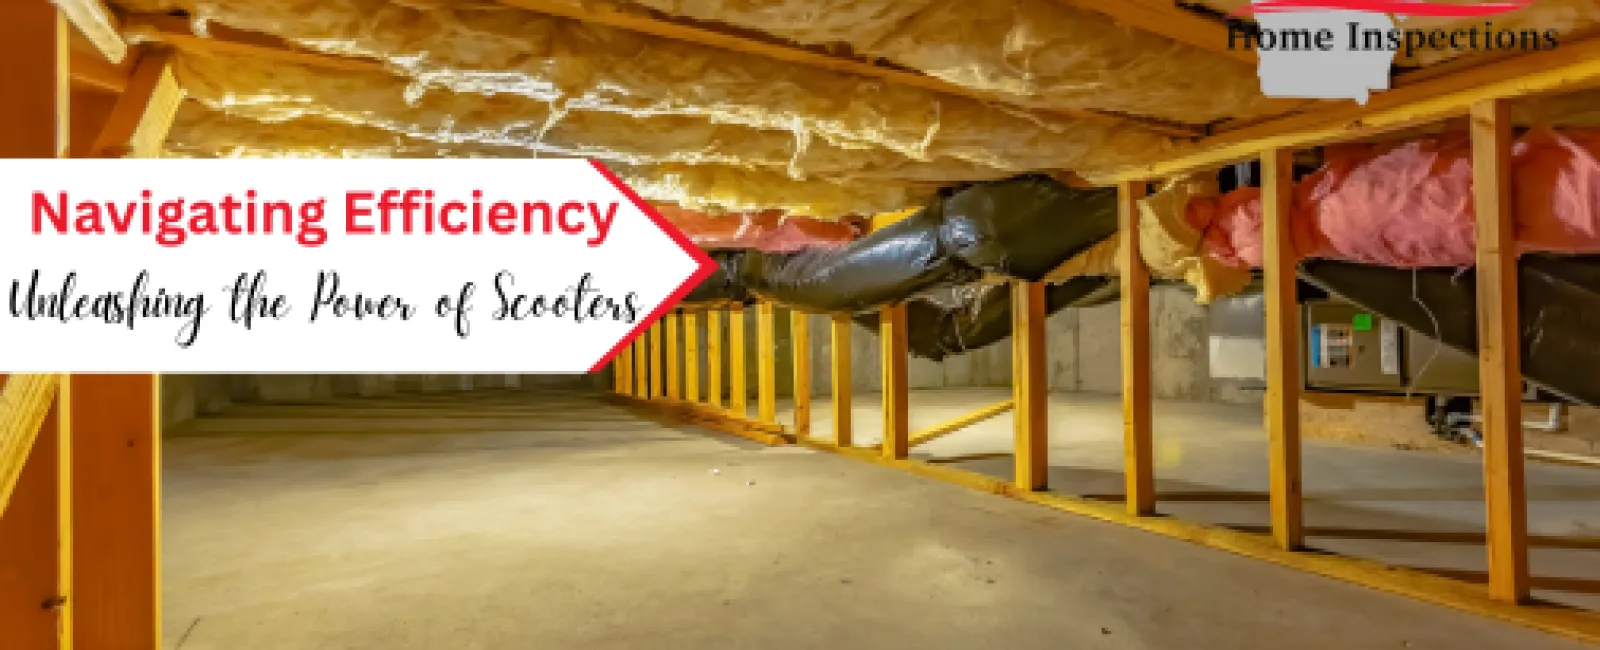 Navigating Efficiency: Unleashing the Power of Scooters in Crawl Space Work